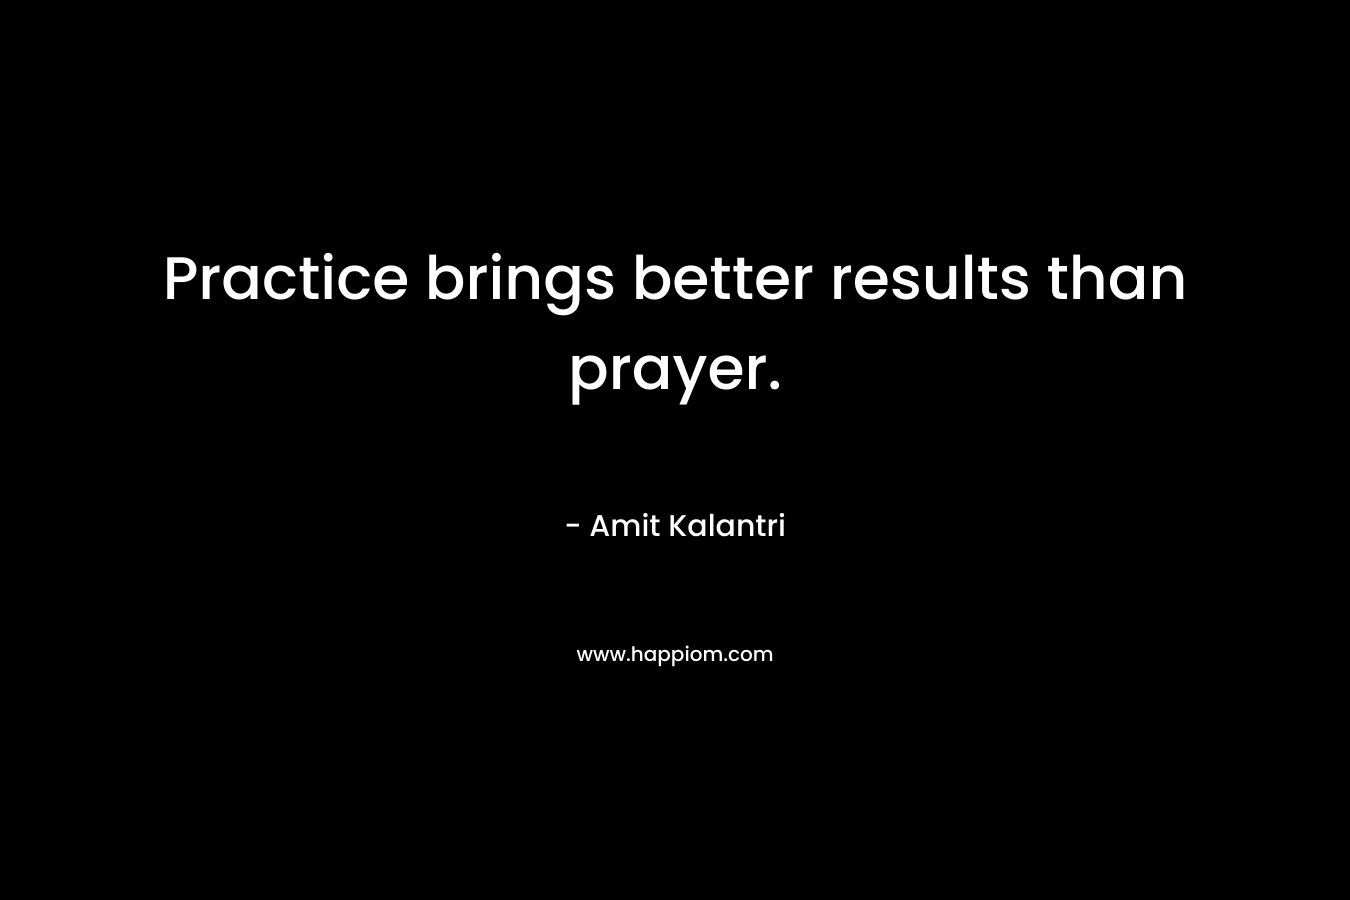 Practice brings better results than prayer.